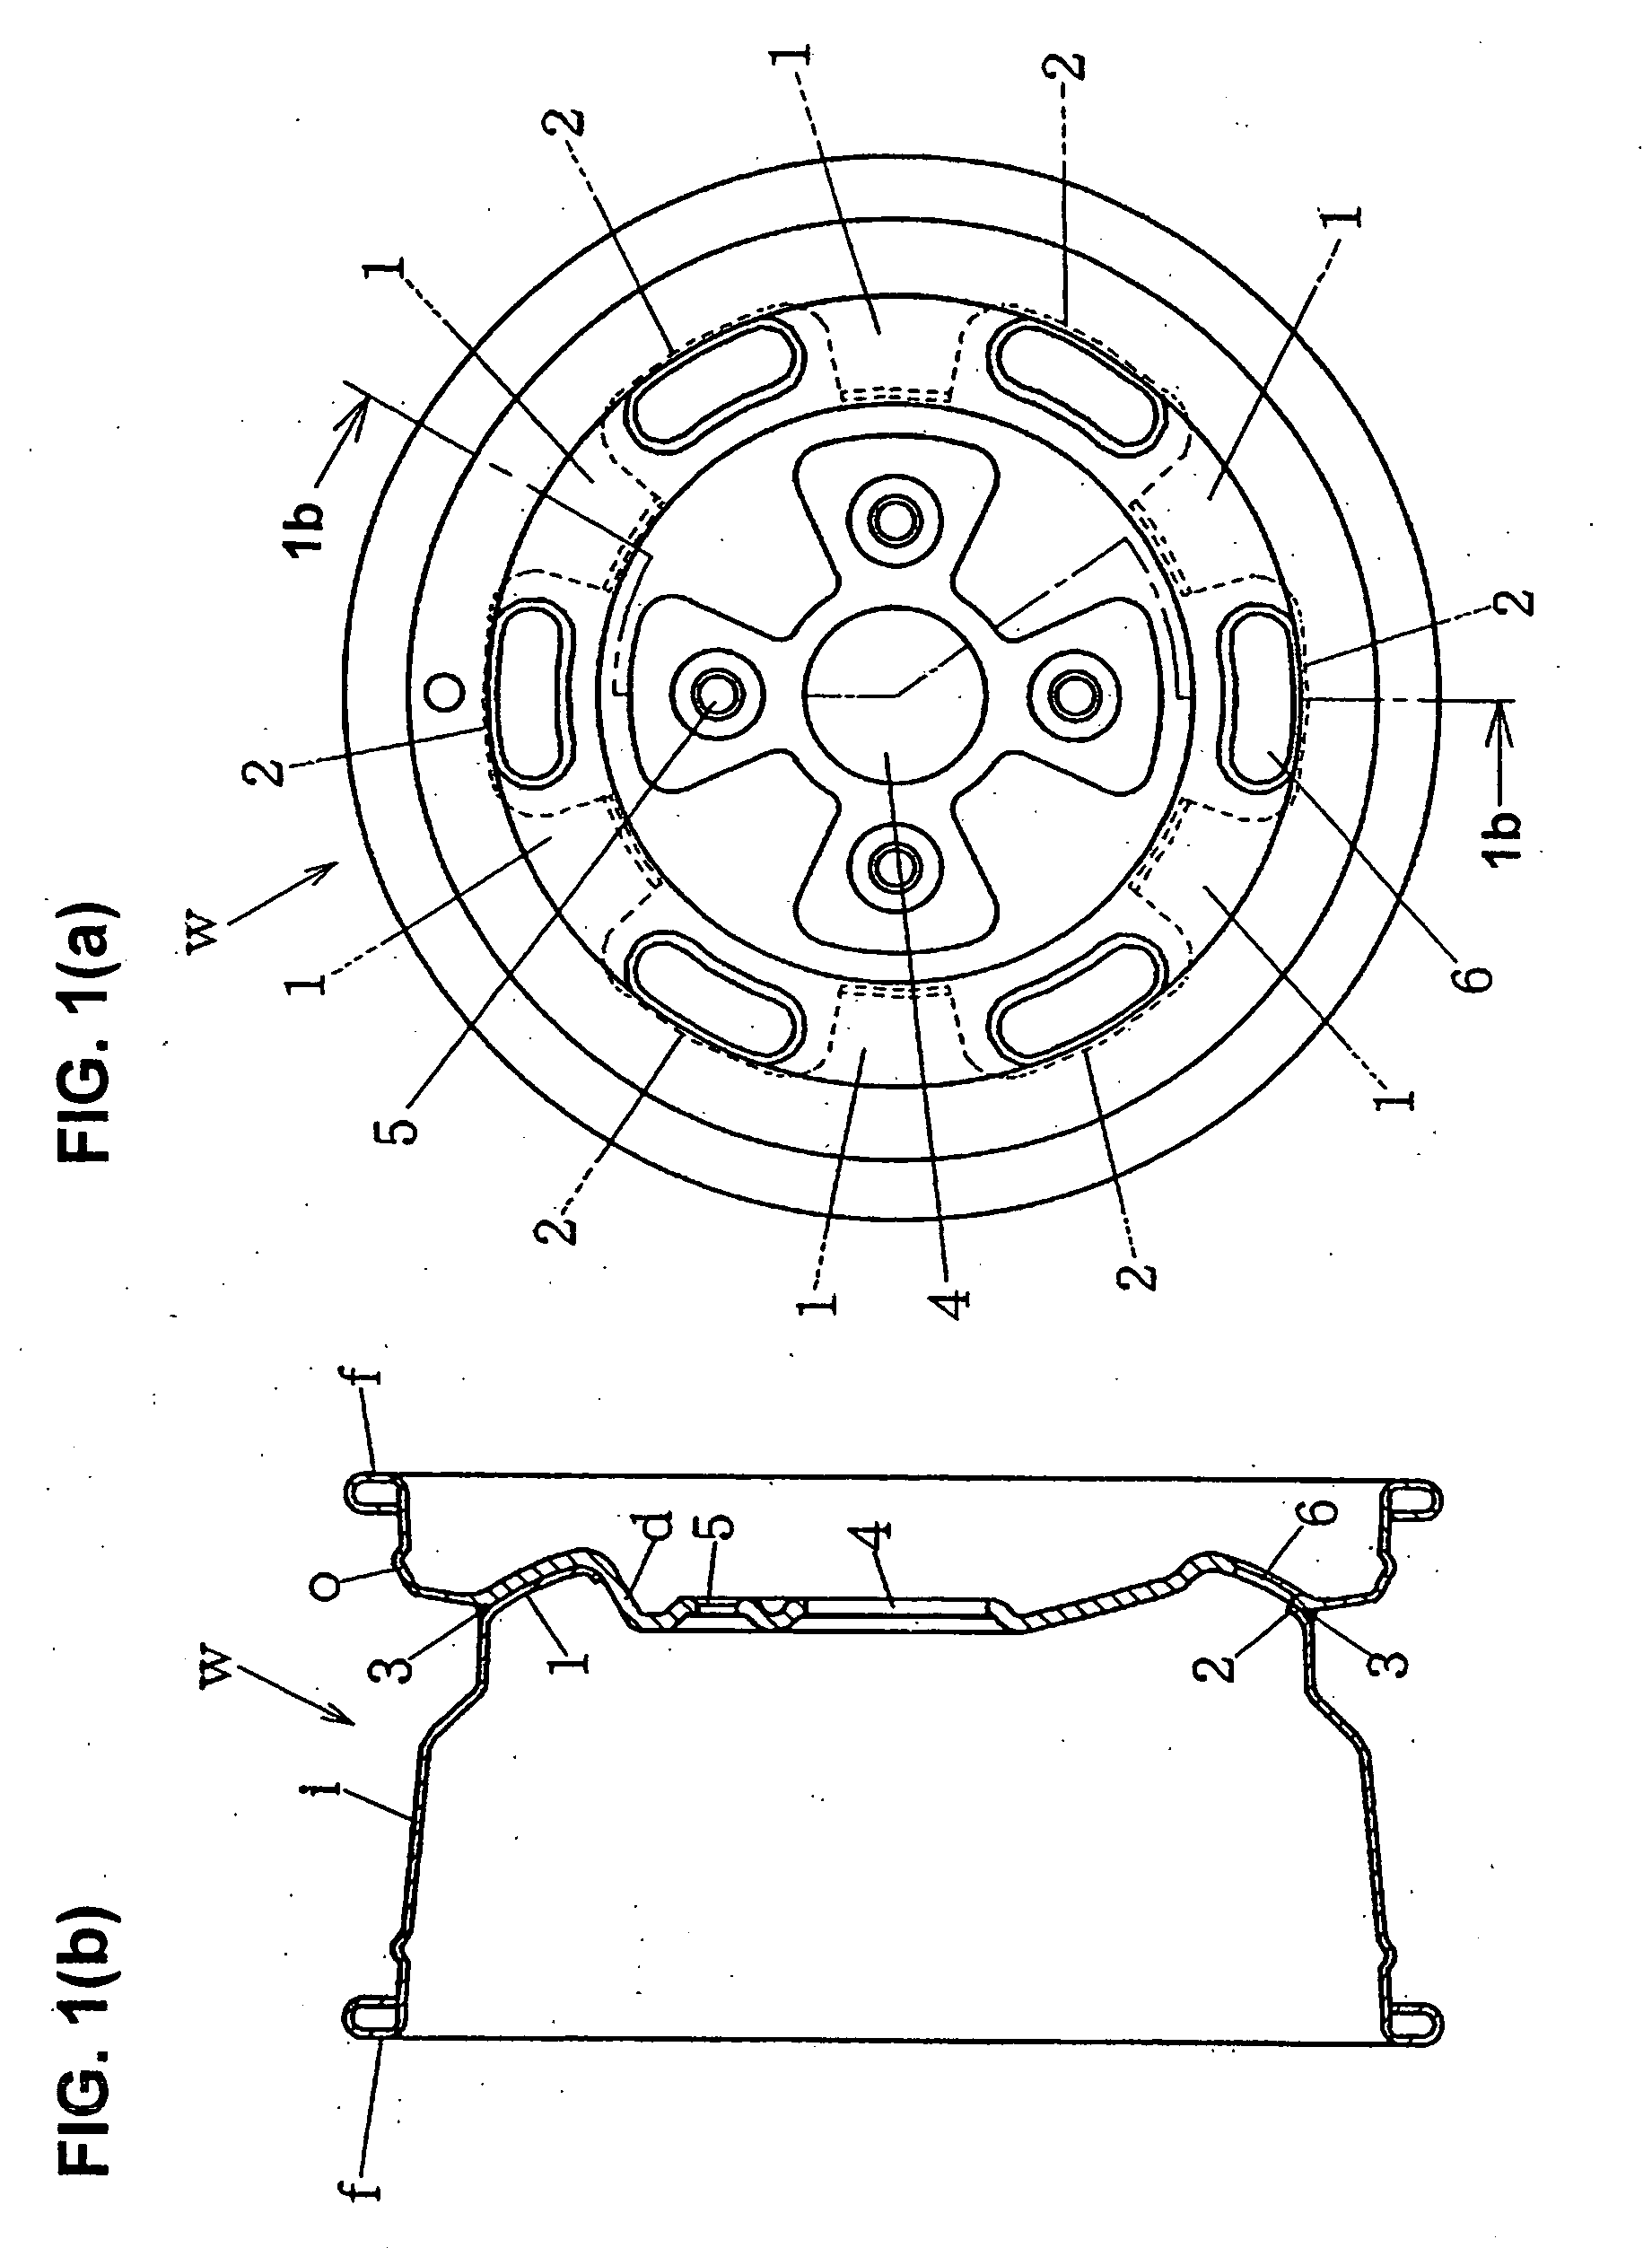 Wheel for vehicles and method for producing the same